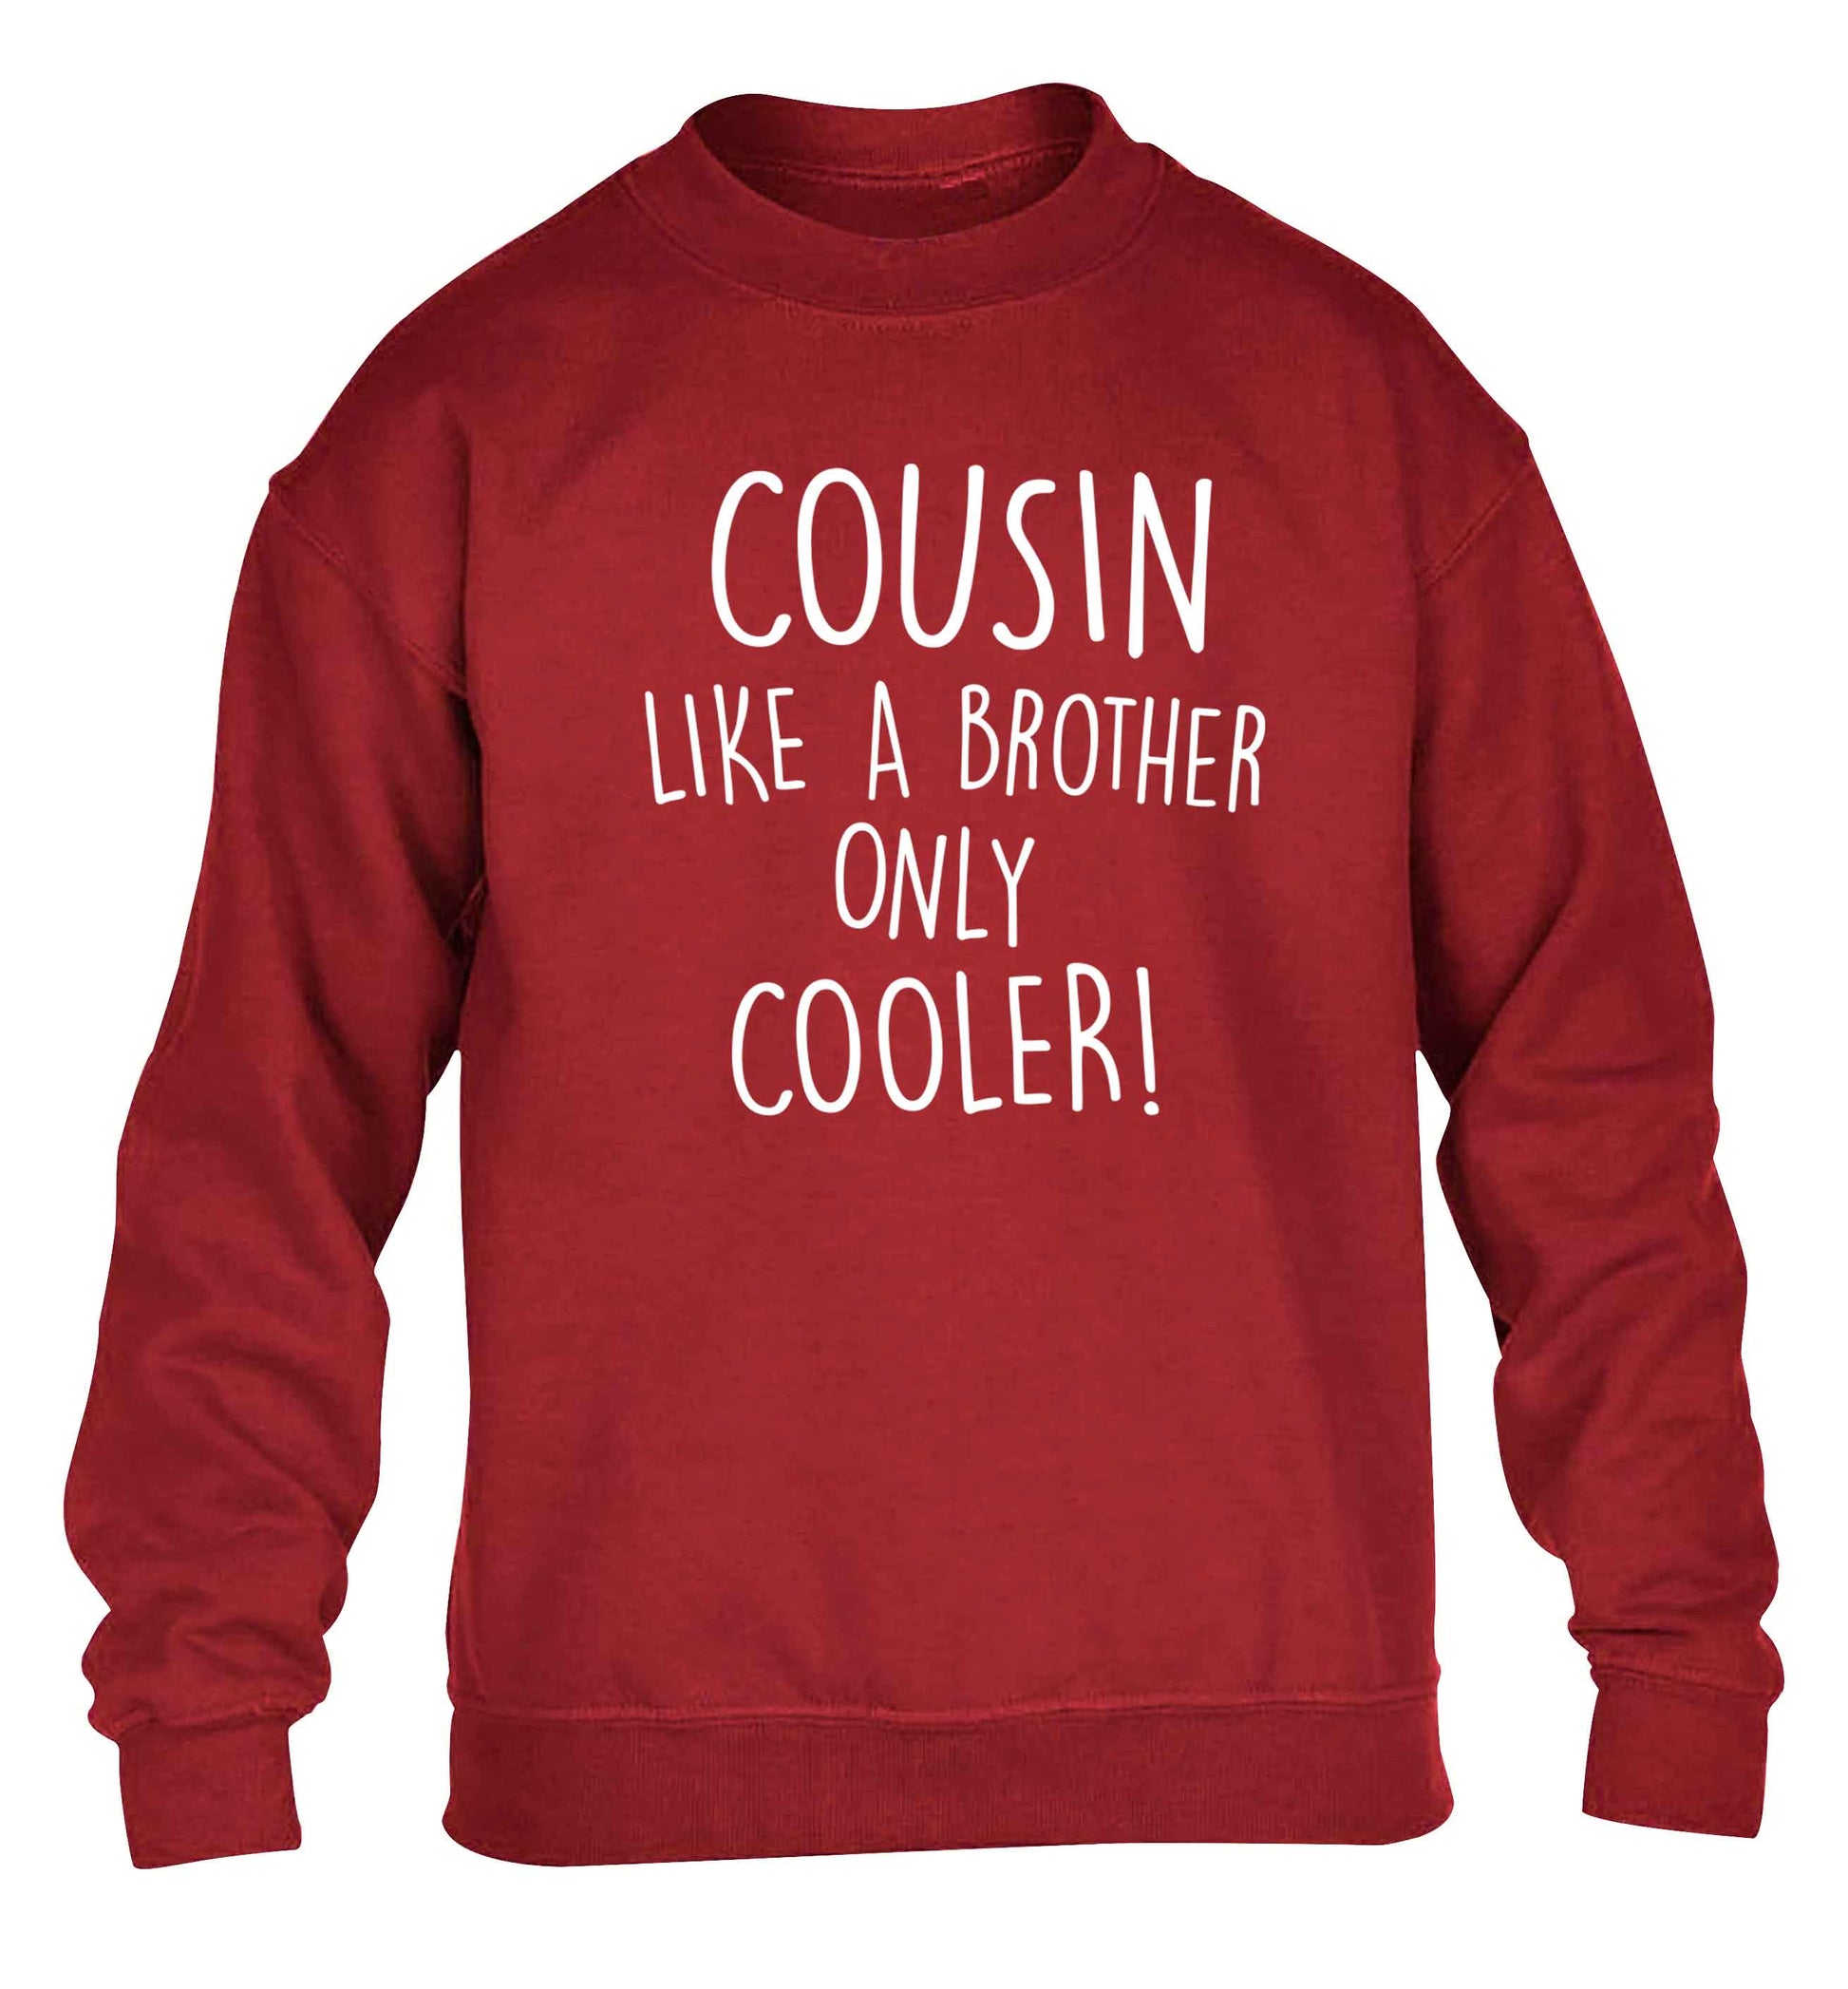 Cousin like a brother only cooler children's grey sweater 12-13 Years